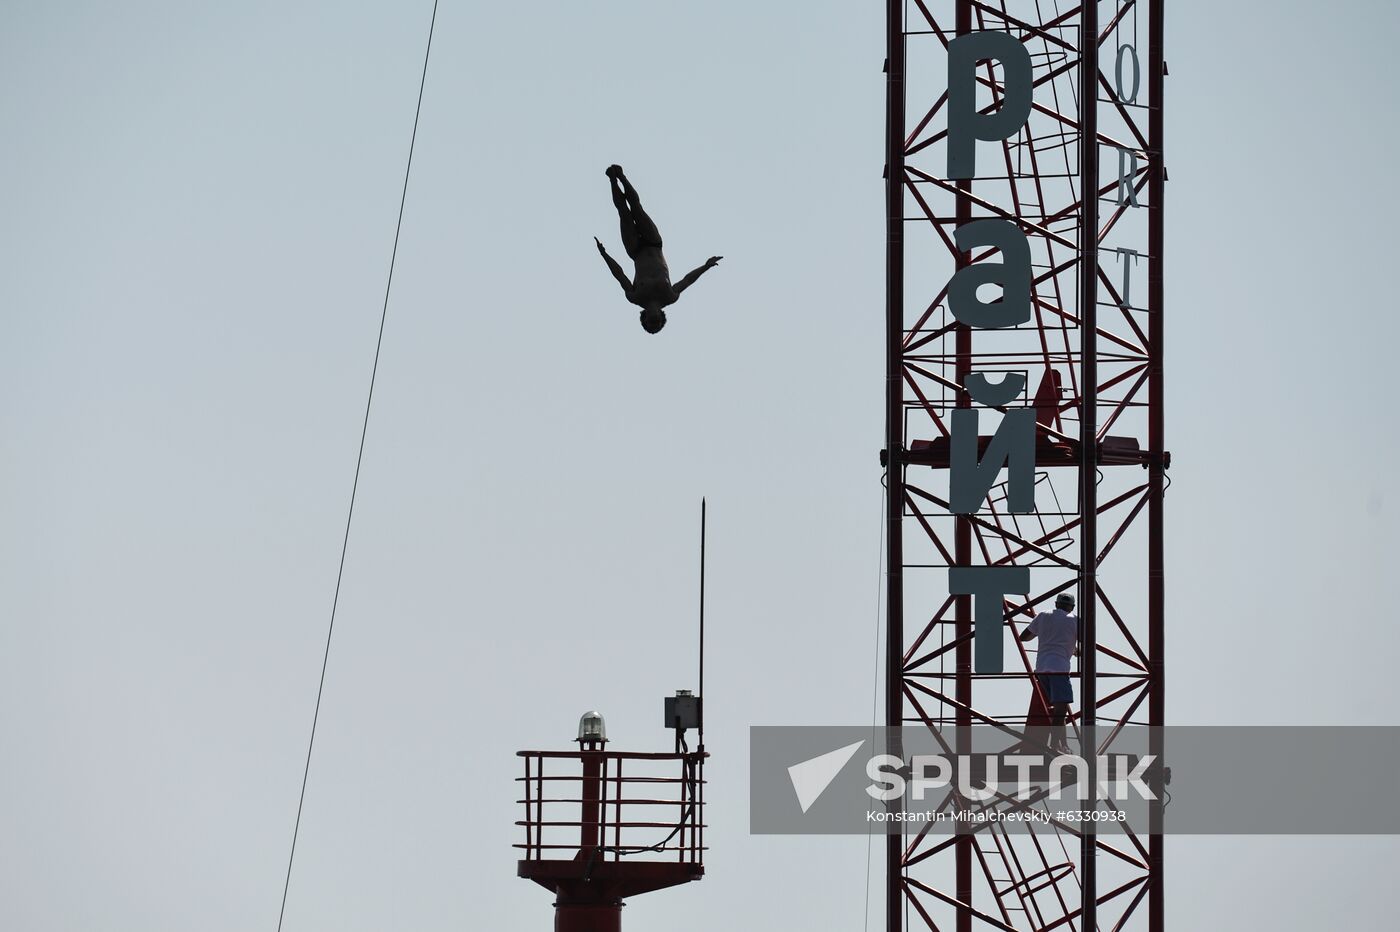 Russia Crimea High Diving World Cup